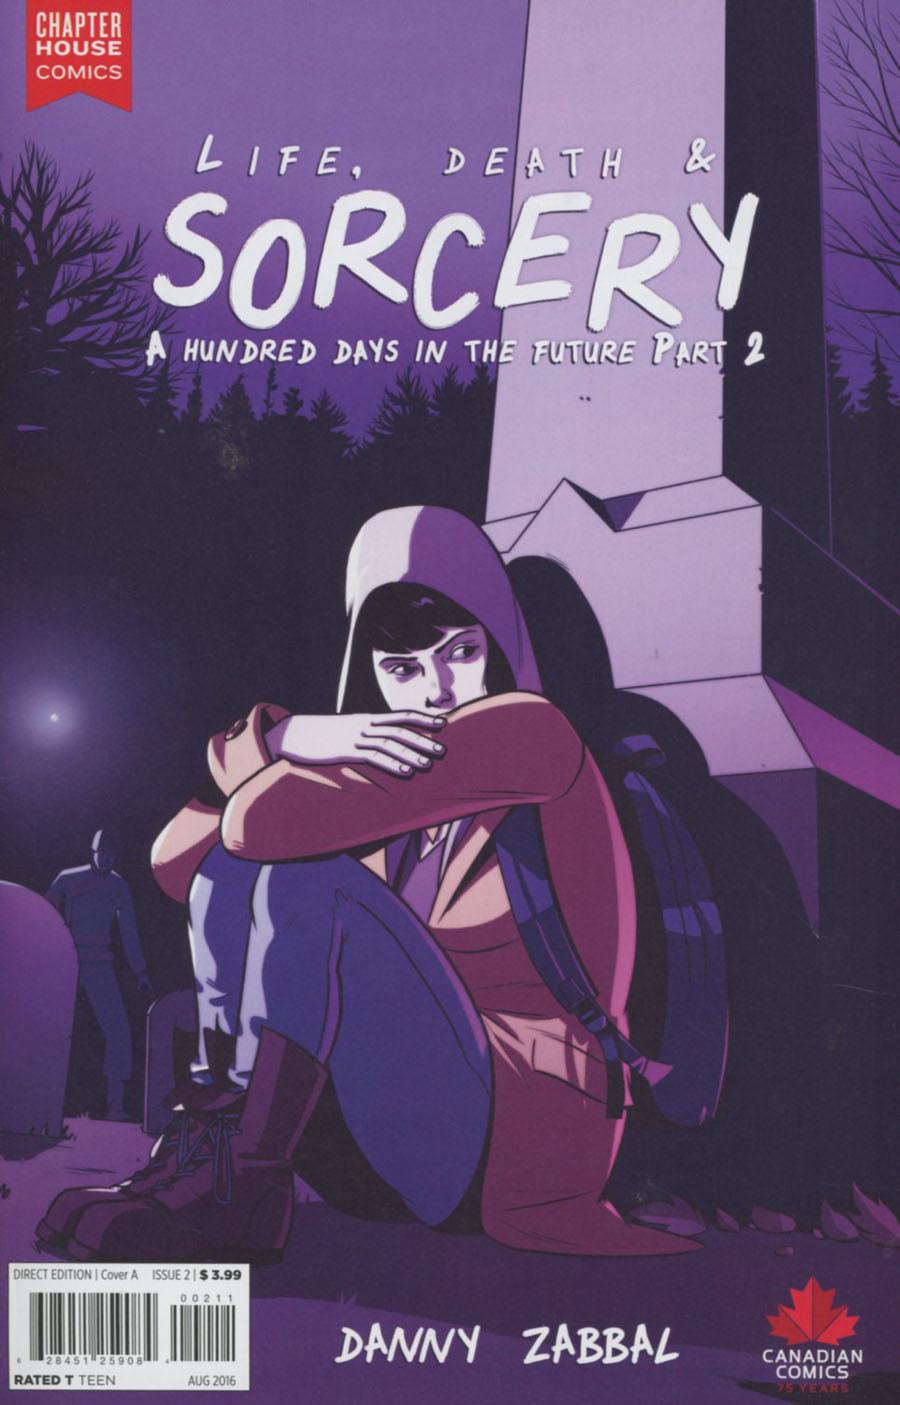 Life Death And Sorcery Vol. 1 #2